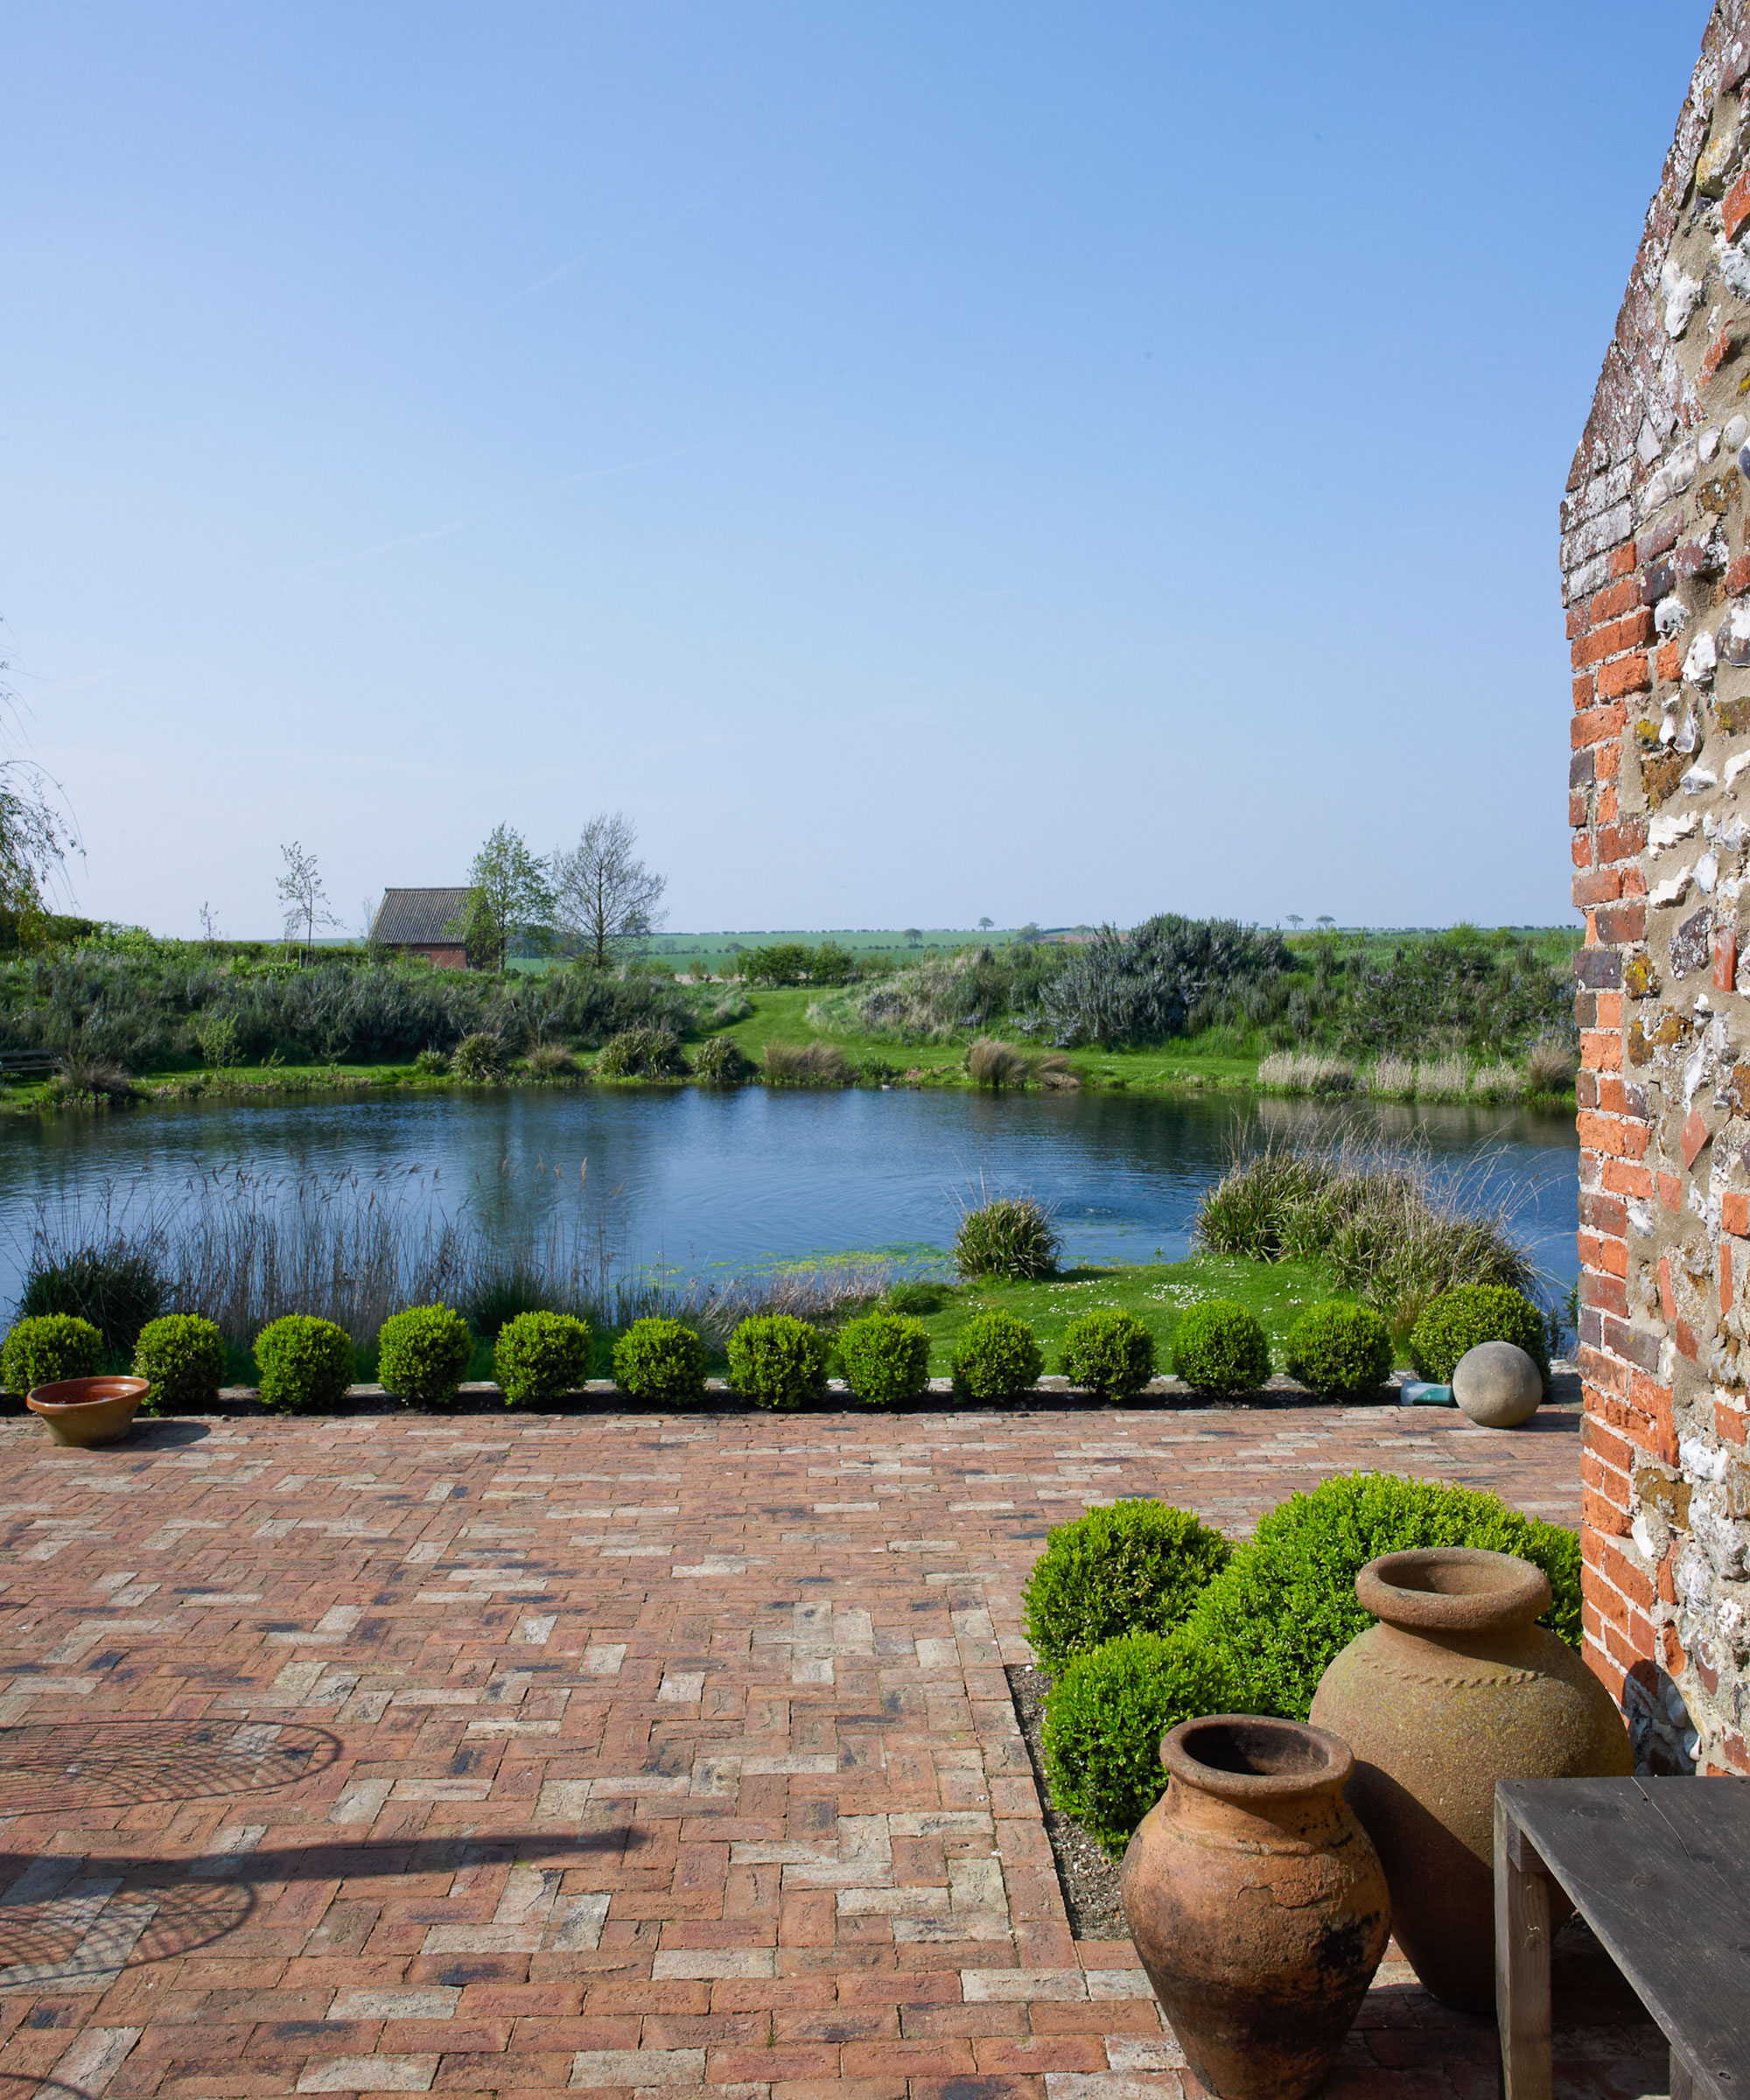 A brick paved courtyard with small round hedges looking onto a lake and fields.